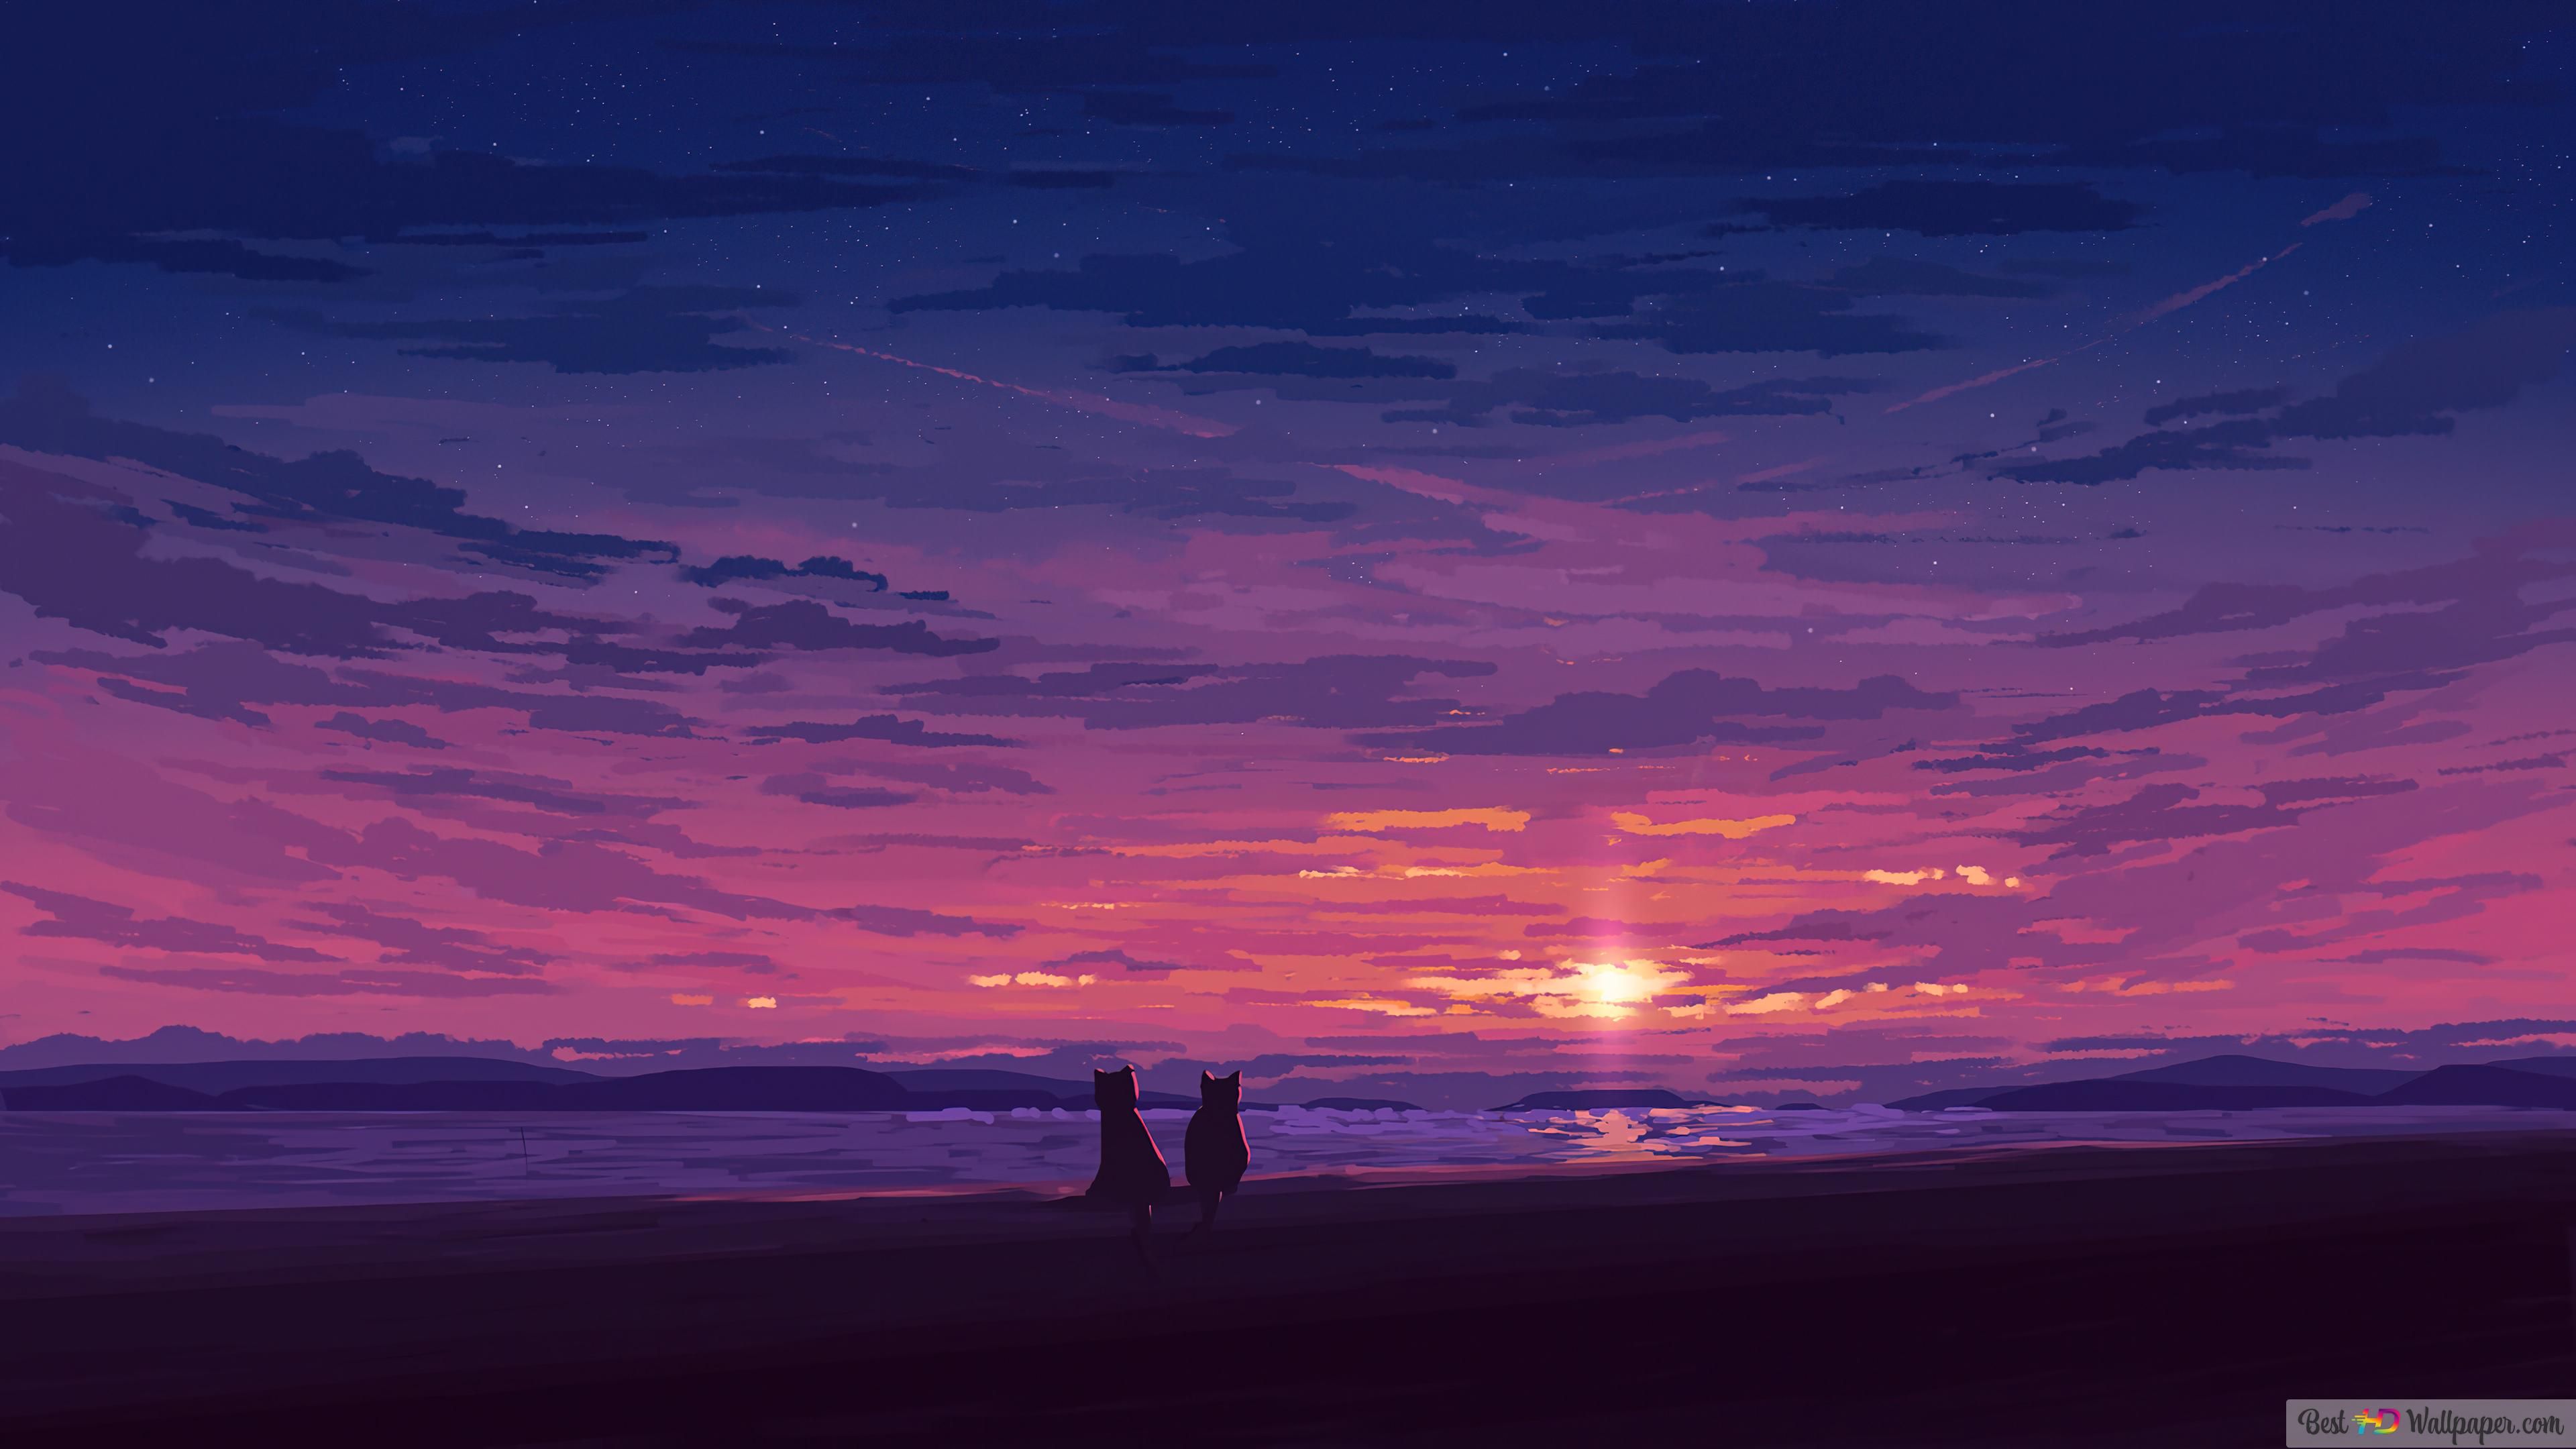 A couple standing on the beach at sunset - Sunset, anime sunset